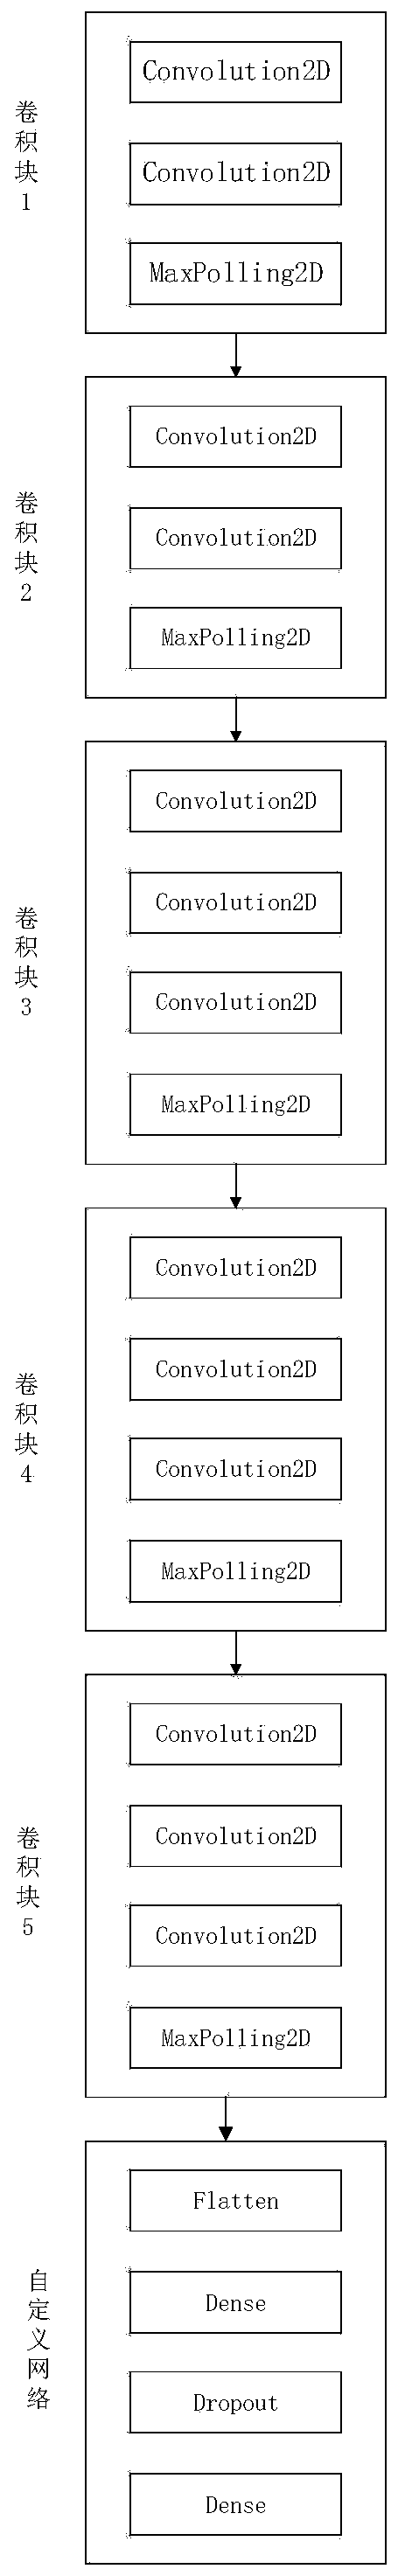 Small sample classification model construction method based on transfer learning and iris classification application